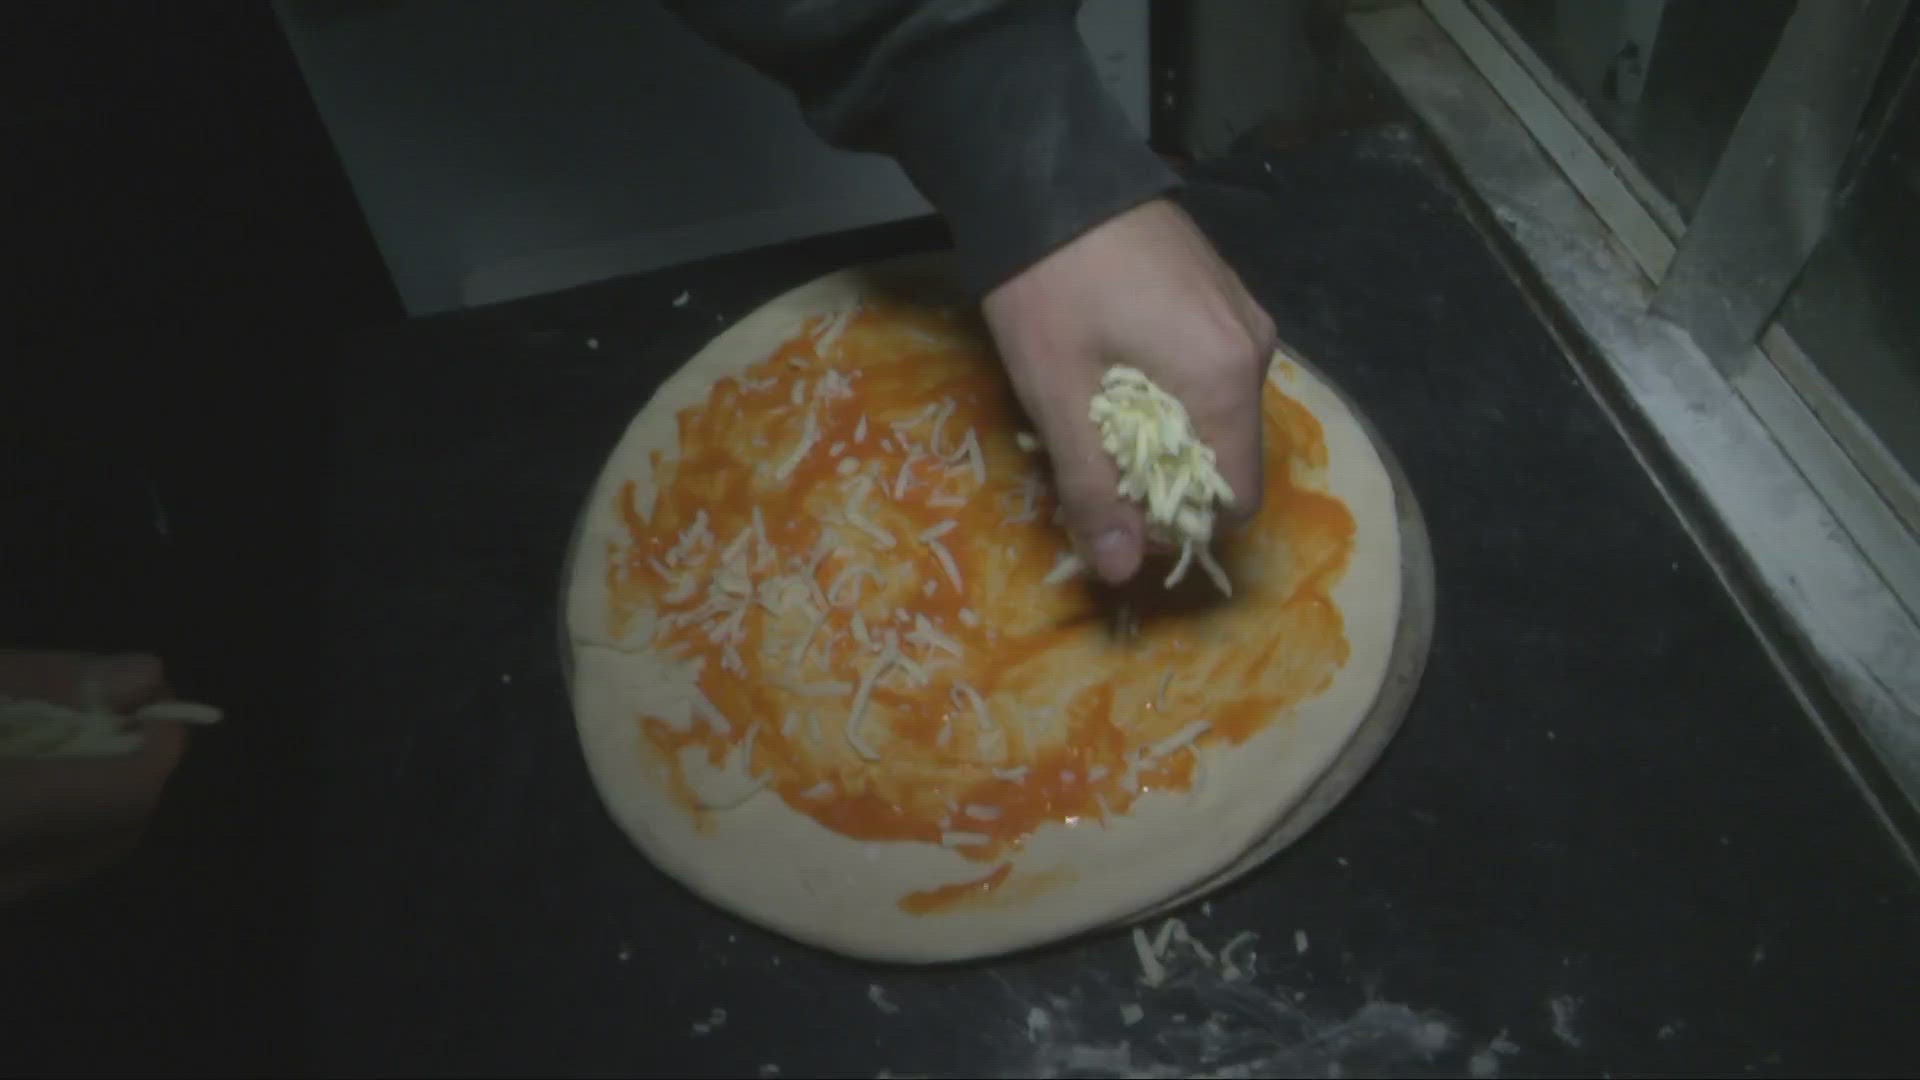 Cleveland Wood Fired Pizza joins Dave Chudowsky for Pi Day pizza